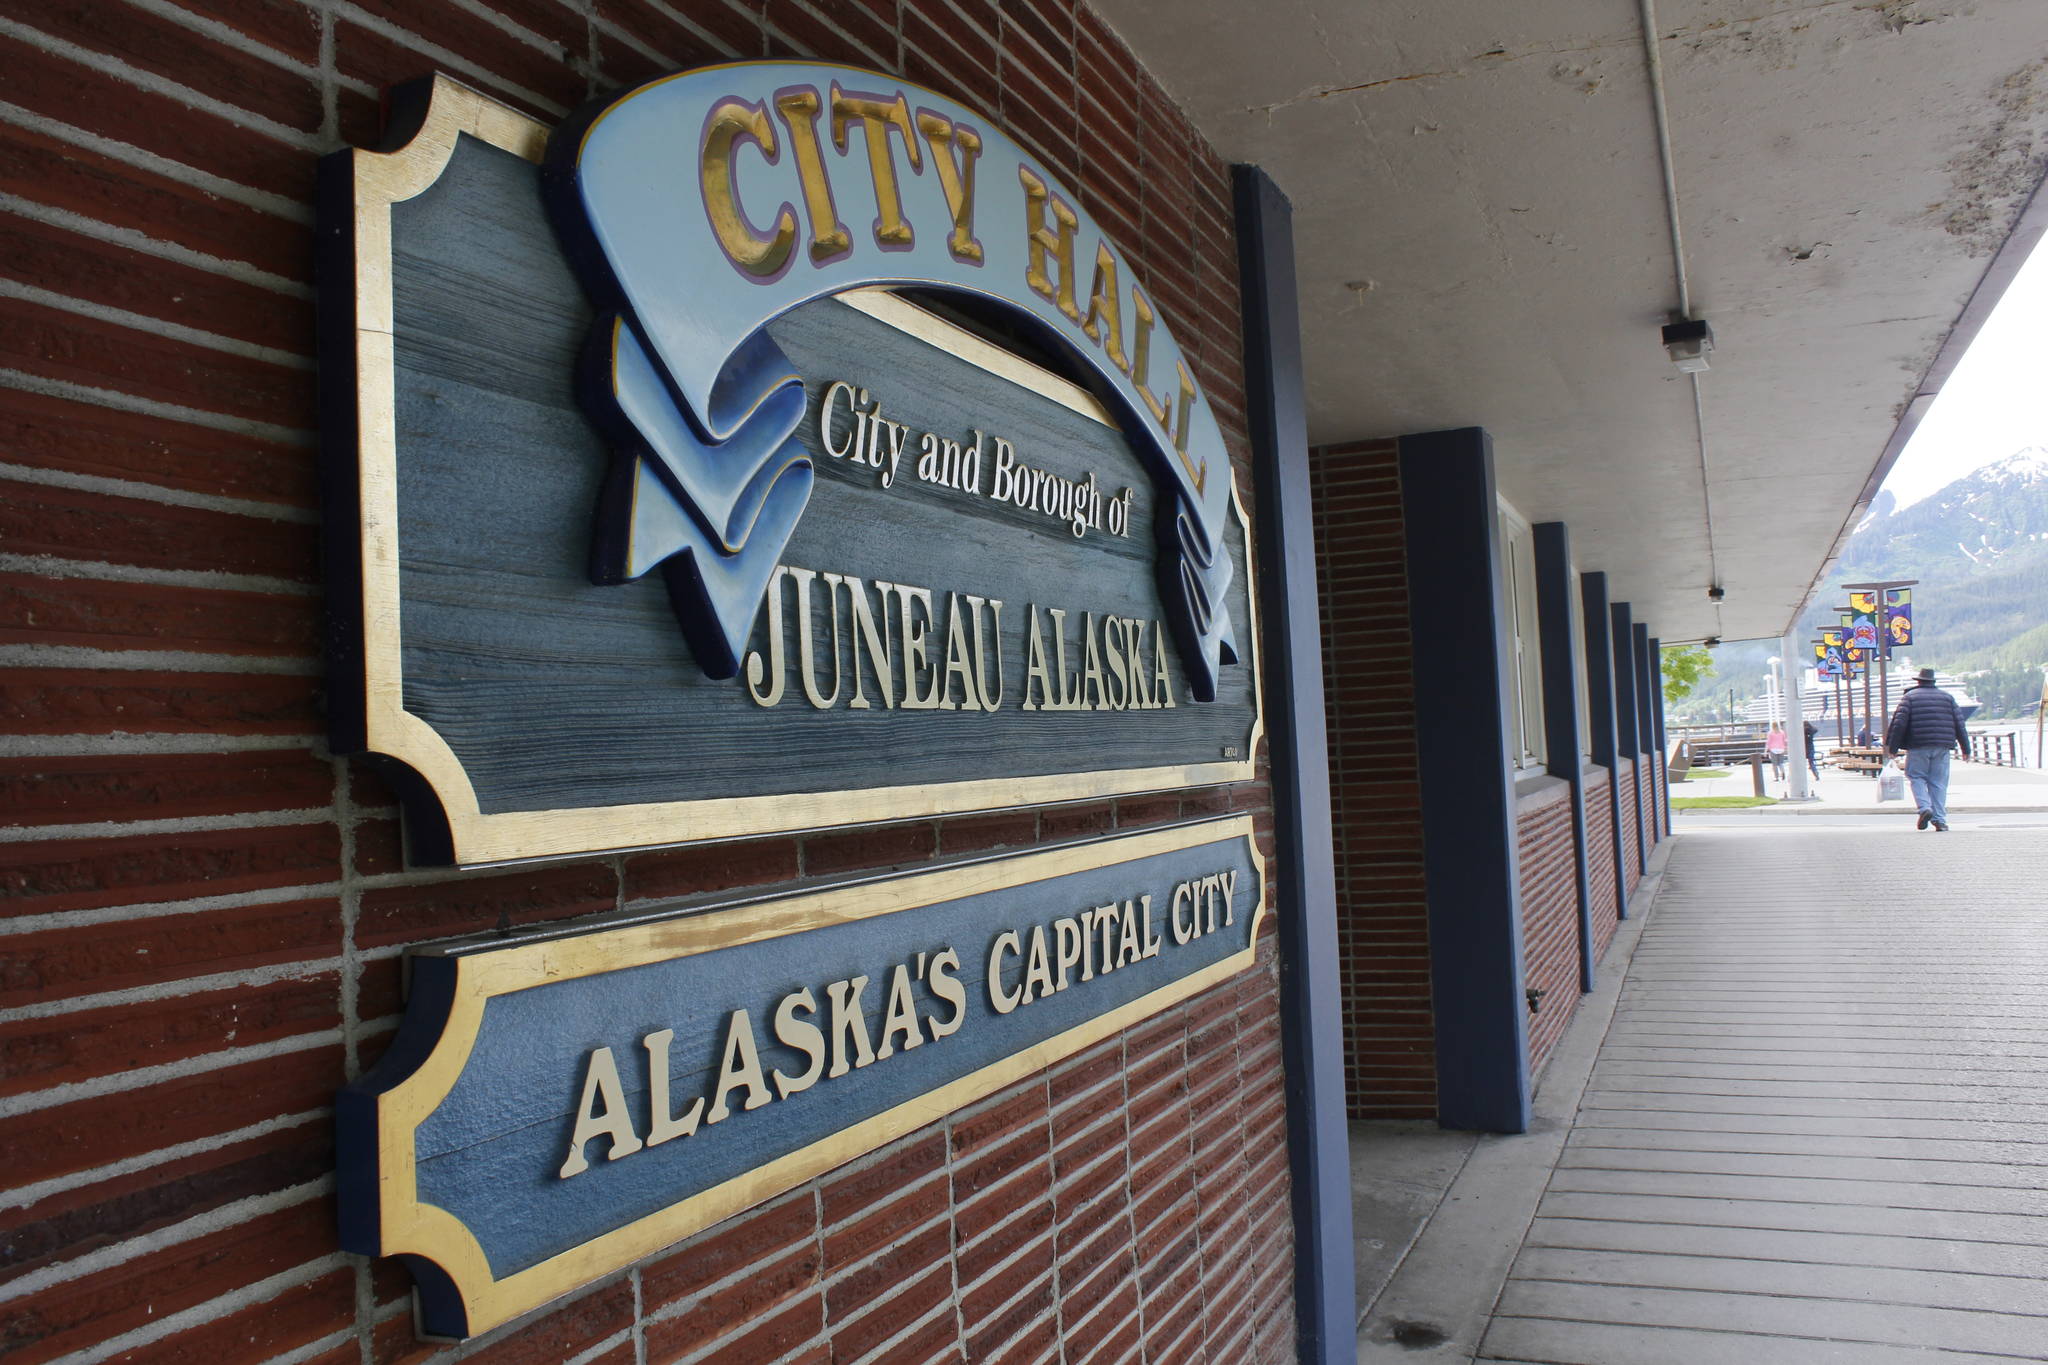 A pedestrian walks by City Hall on June 7, 2017. Elections for the City and Borough of Juneau are Oct. 3, and there are two initiatives on the ballot. (Alex McCarthy | Juneau Empire)